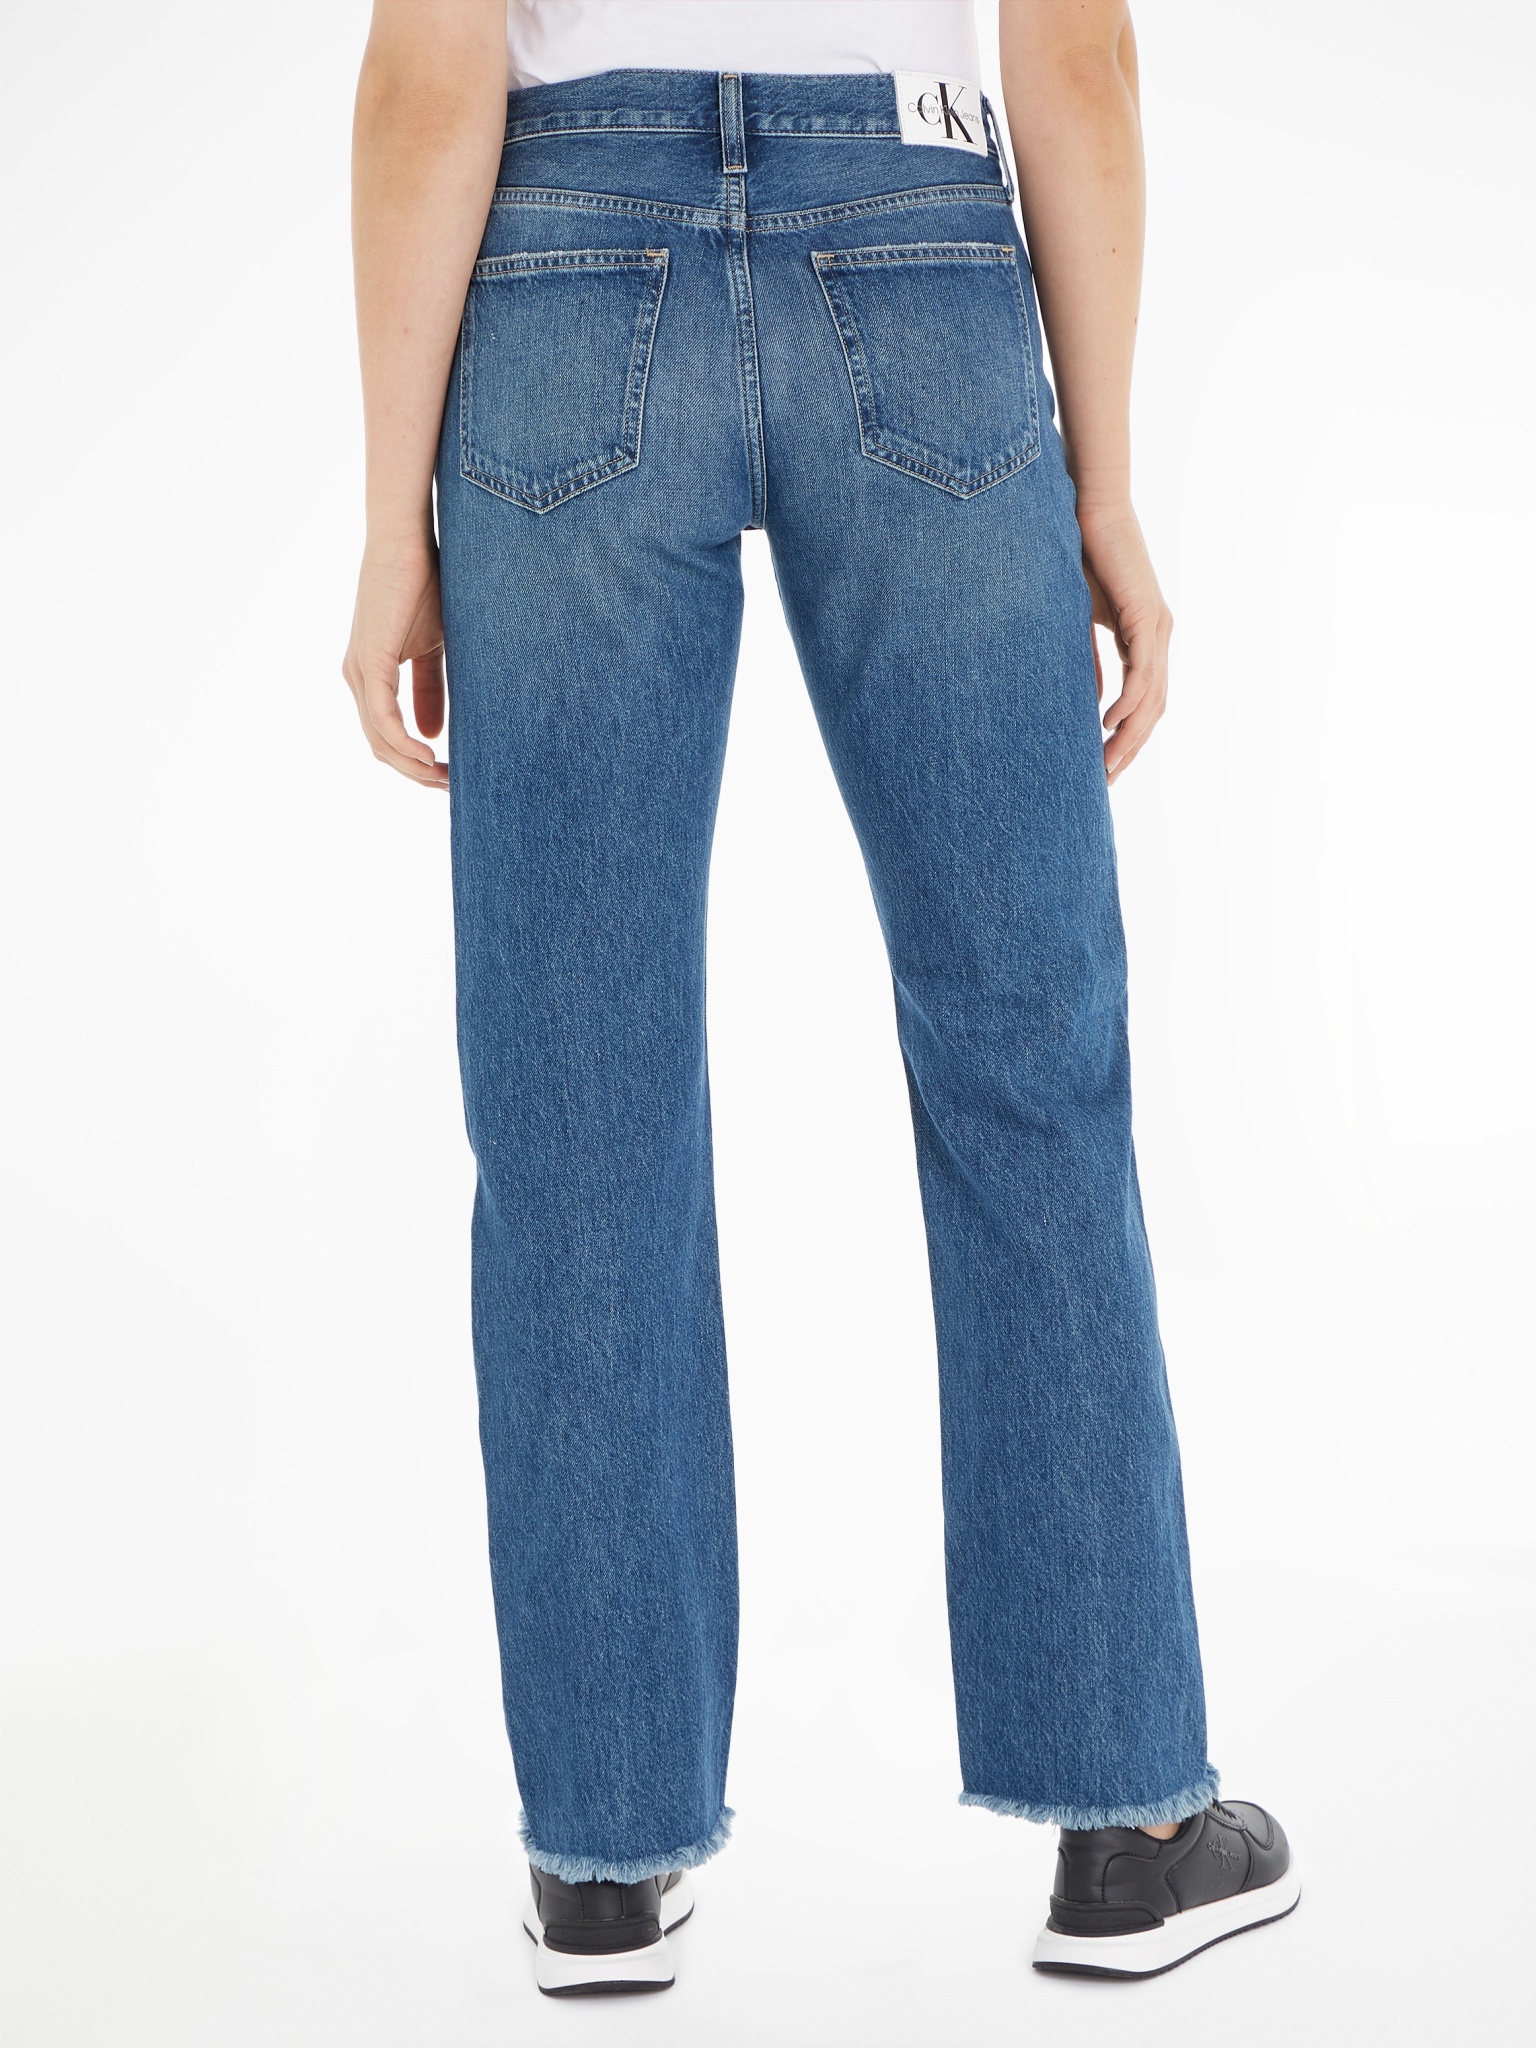 CALVIN KLEIN JEANS Jeans LOW RISE STRAIGHT 10704111